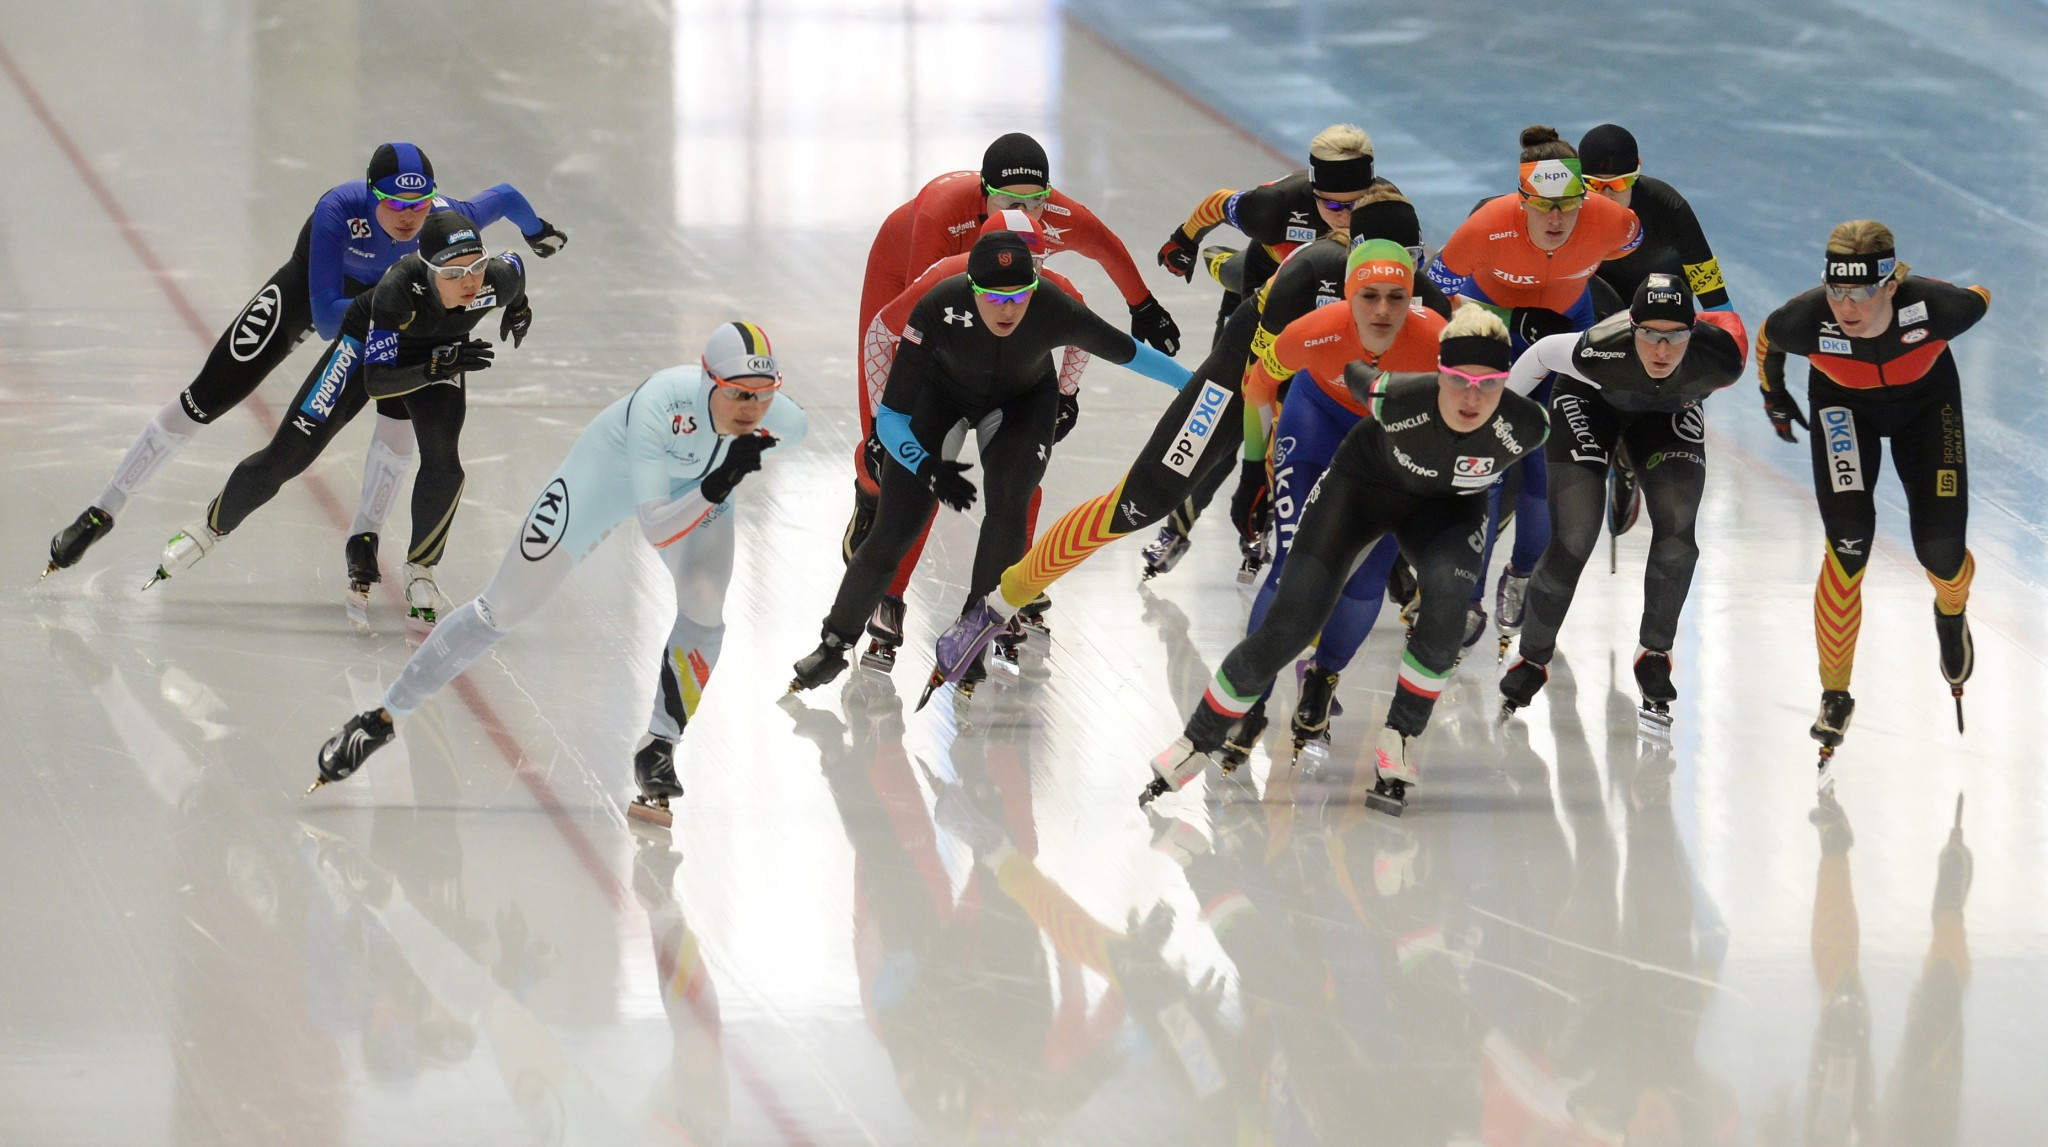 An existing speed skating venue in Inzell could be used at an Innsbruck Games ©Getty Images